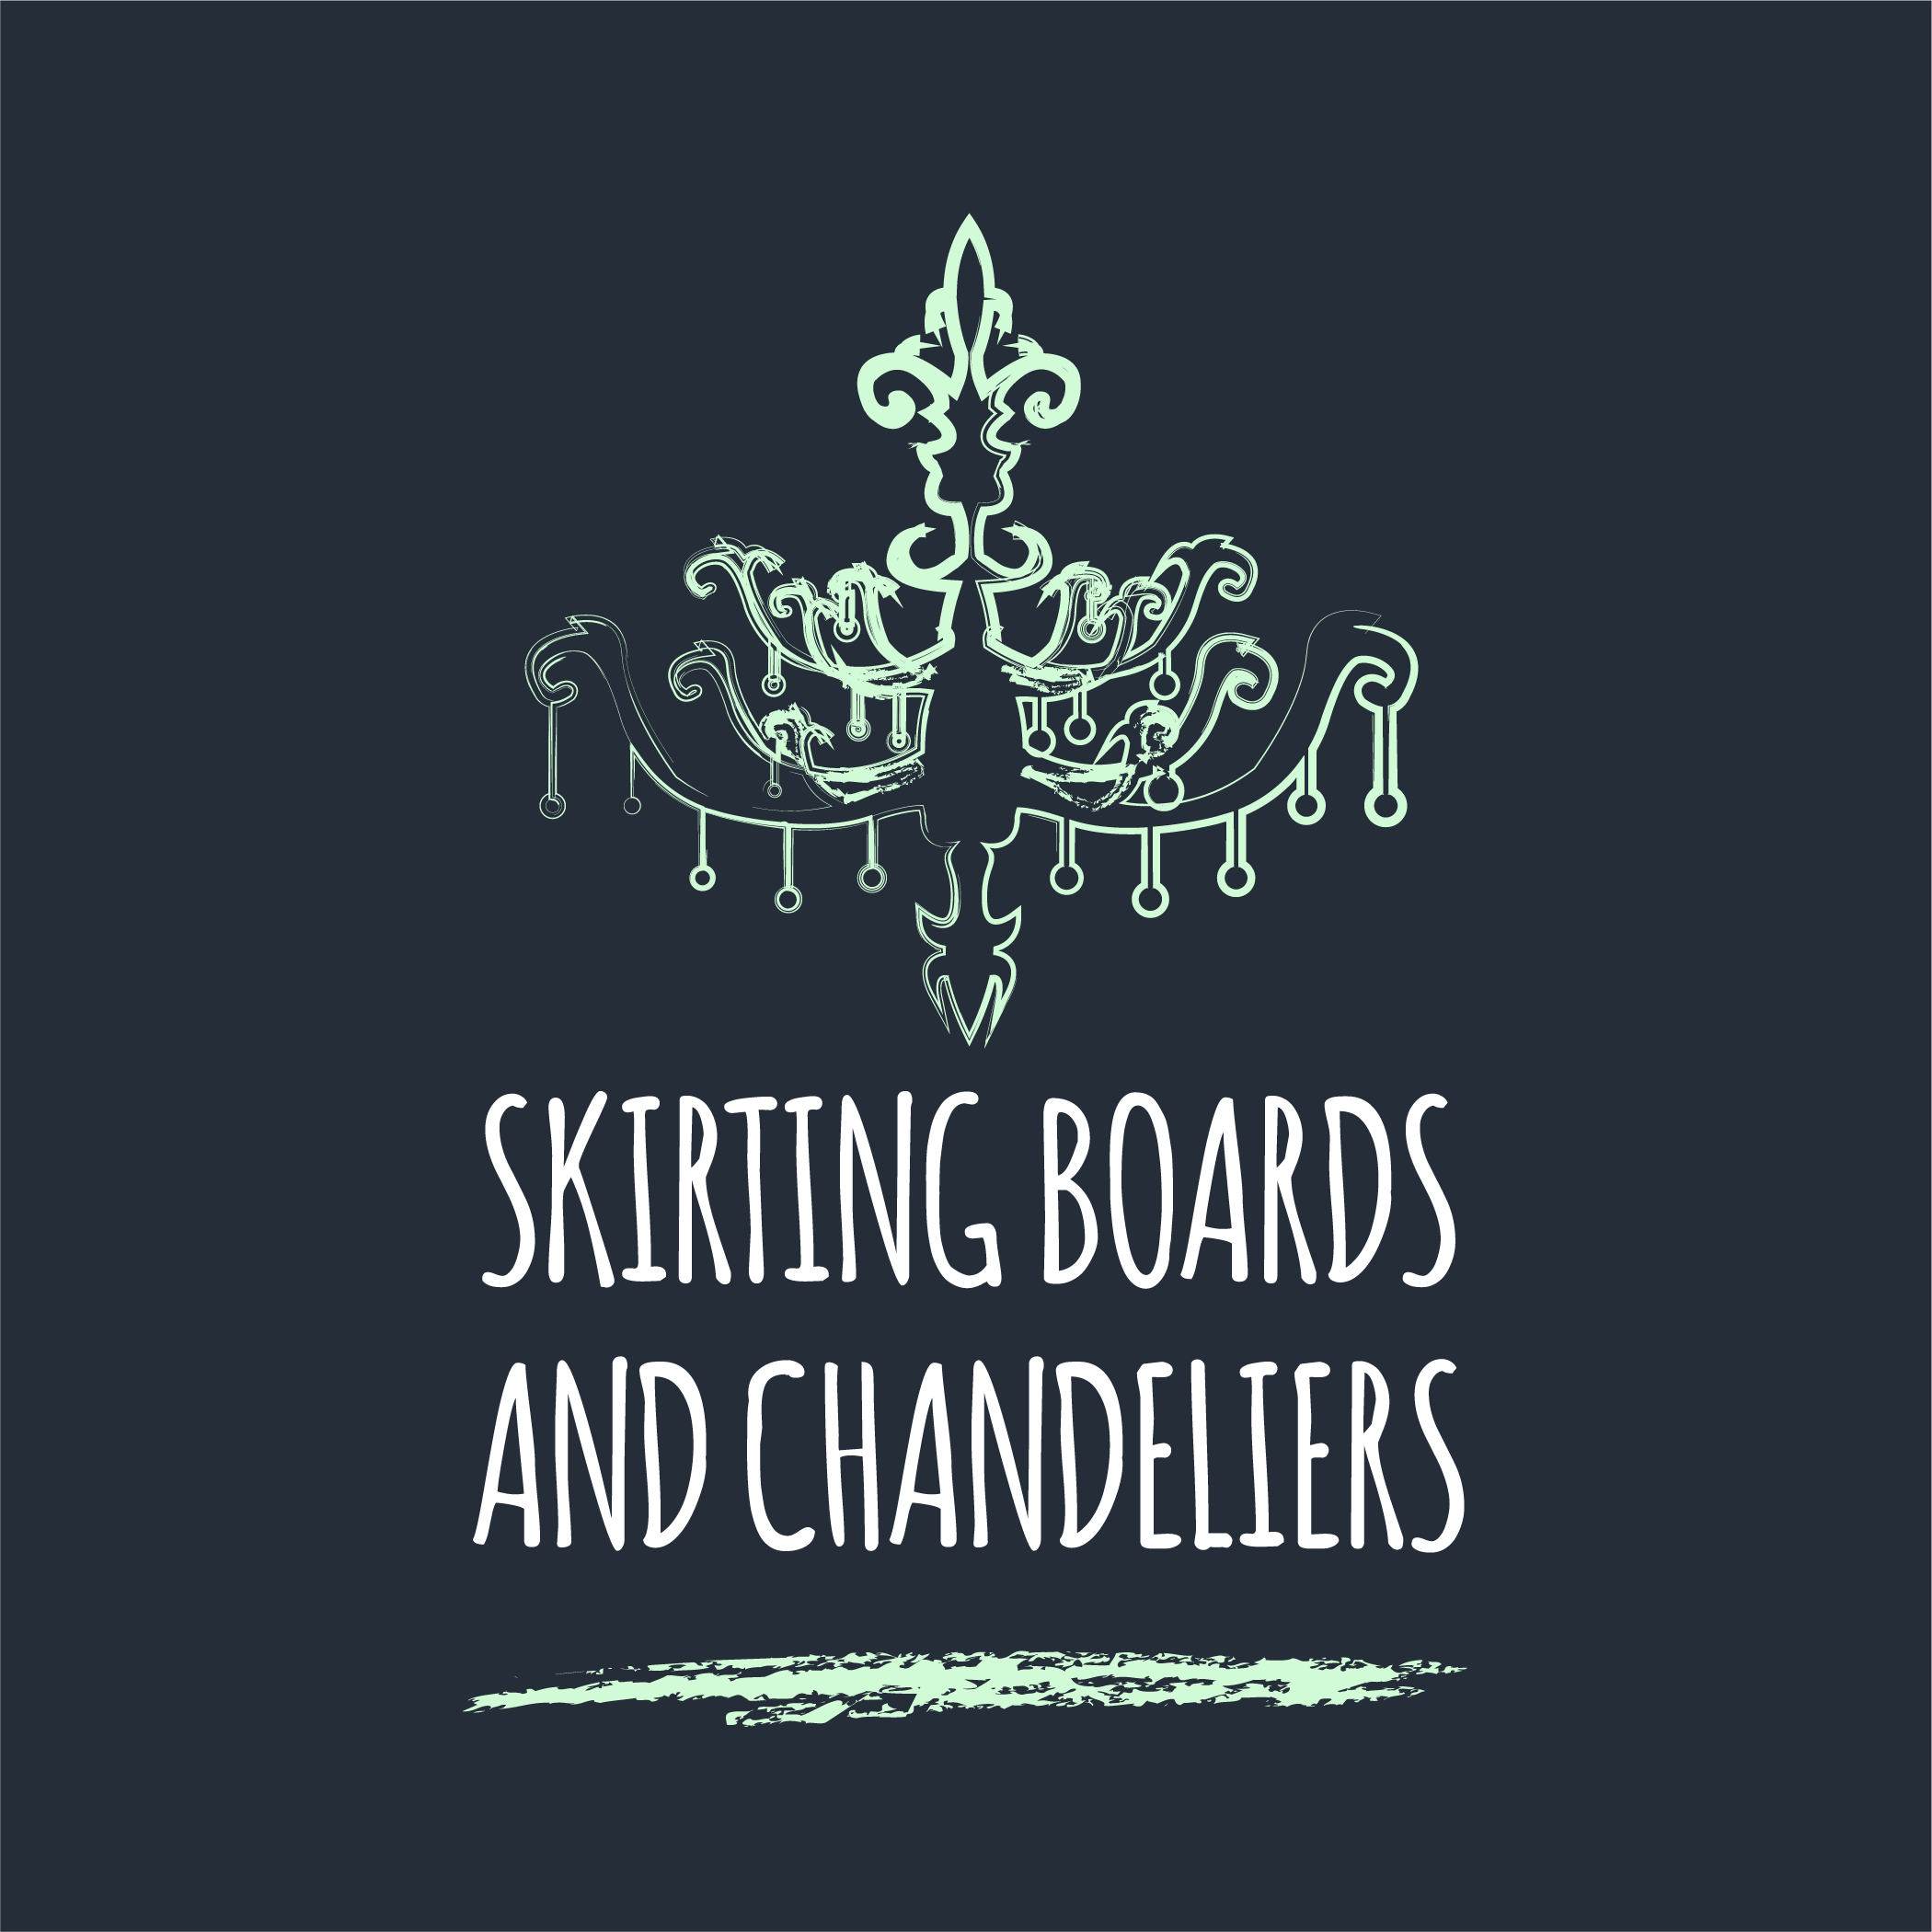 Chandelier Graphic Logo - Skirting Boards and Chandeliers logo | Mummys Gin Fund